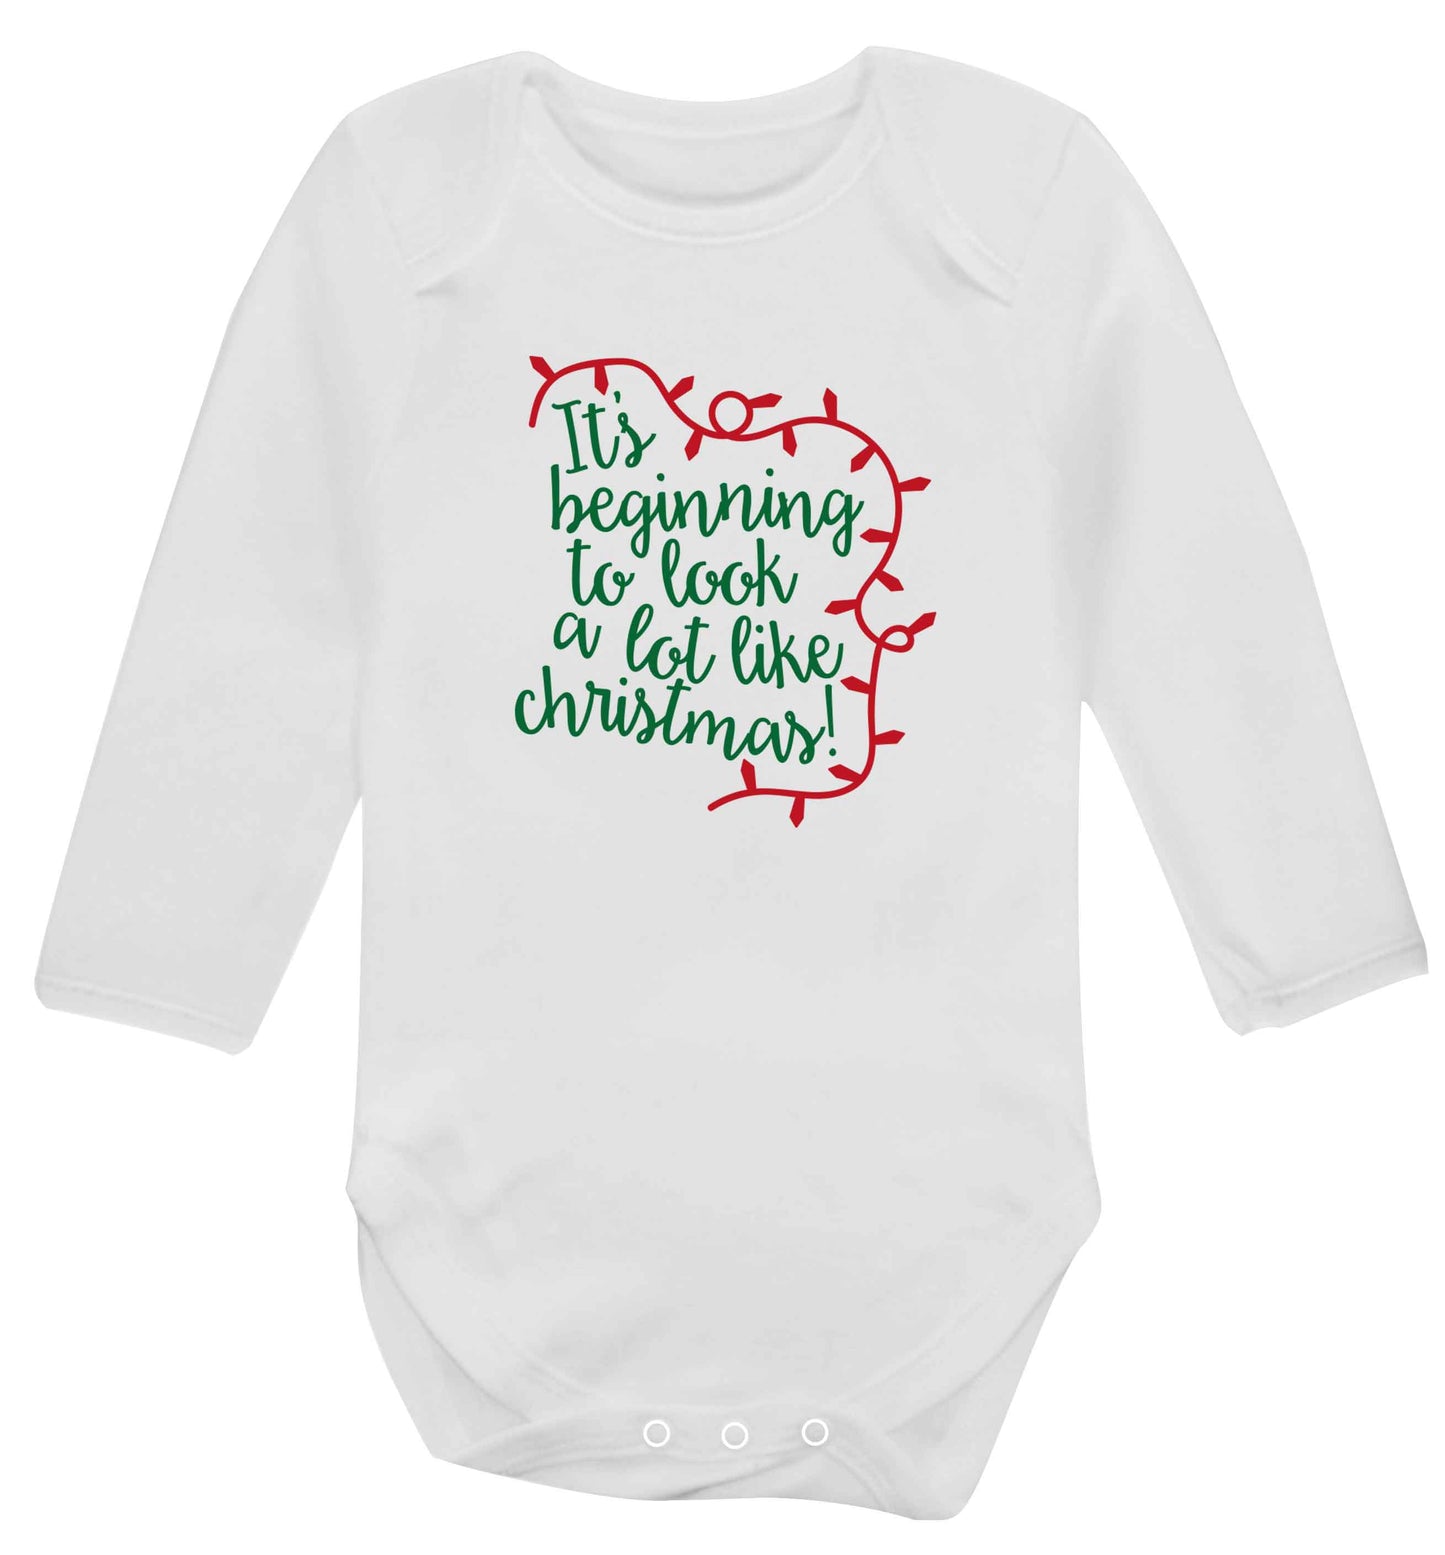 It's beginning to look a lot like Christmas baby vest long sleeved white 6-12 months